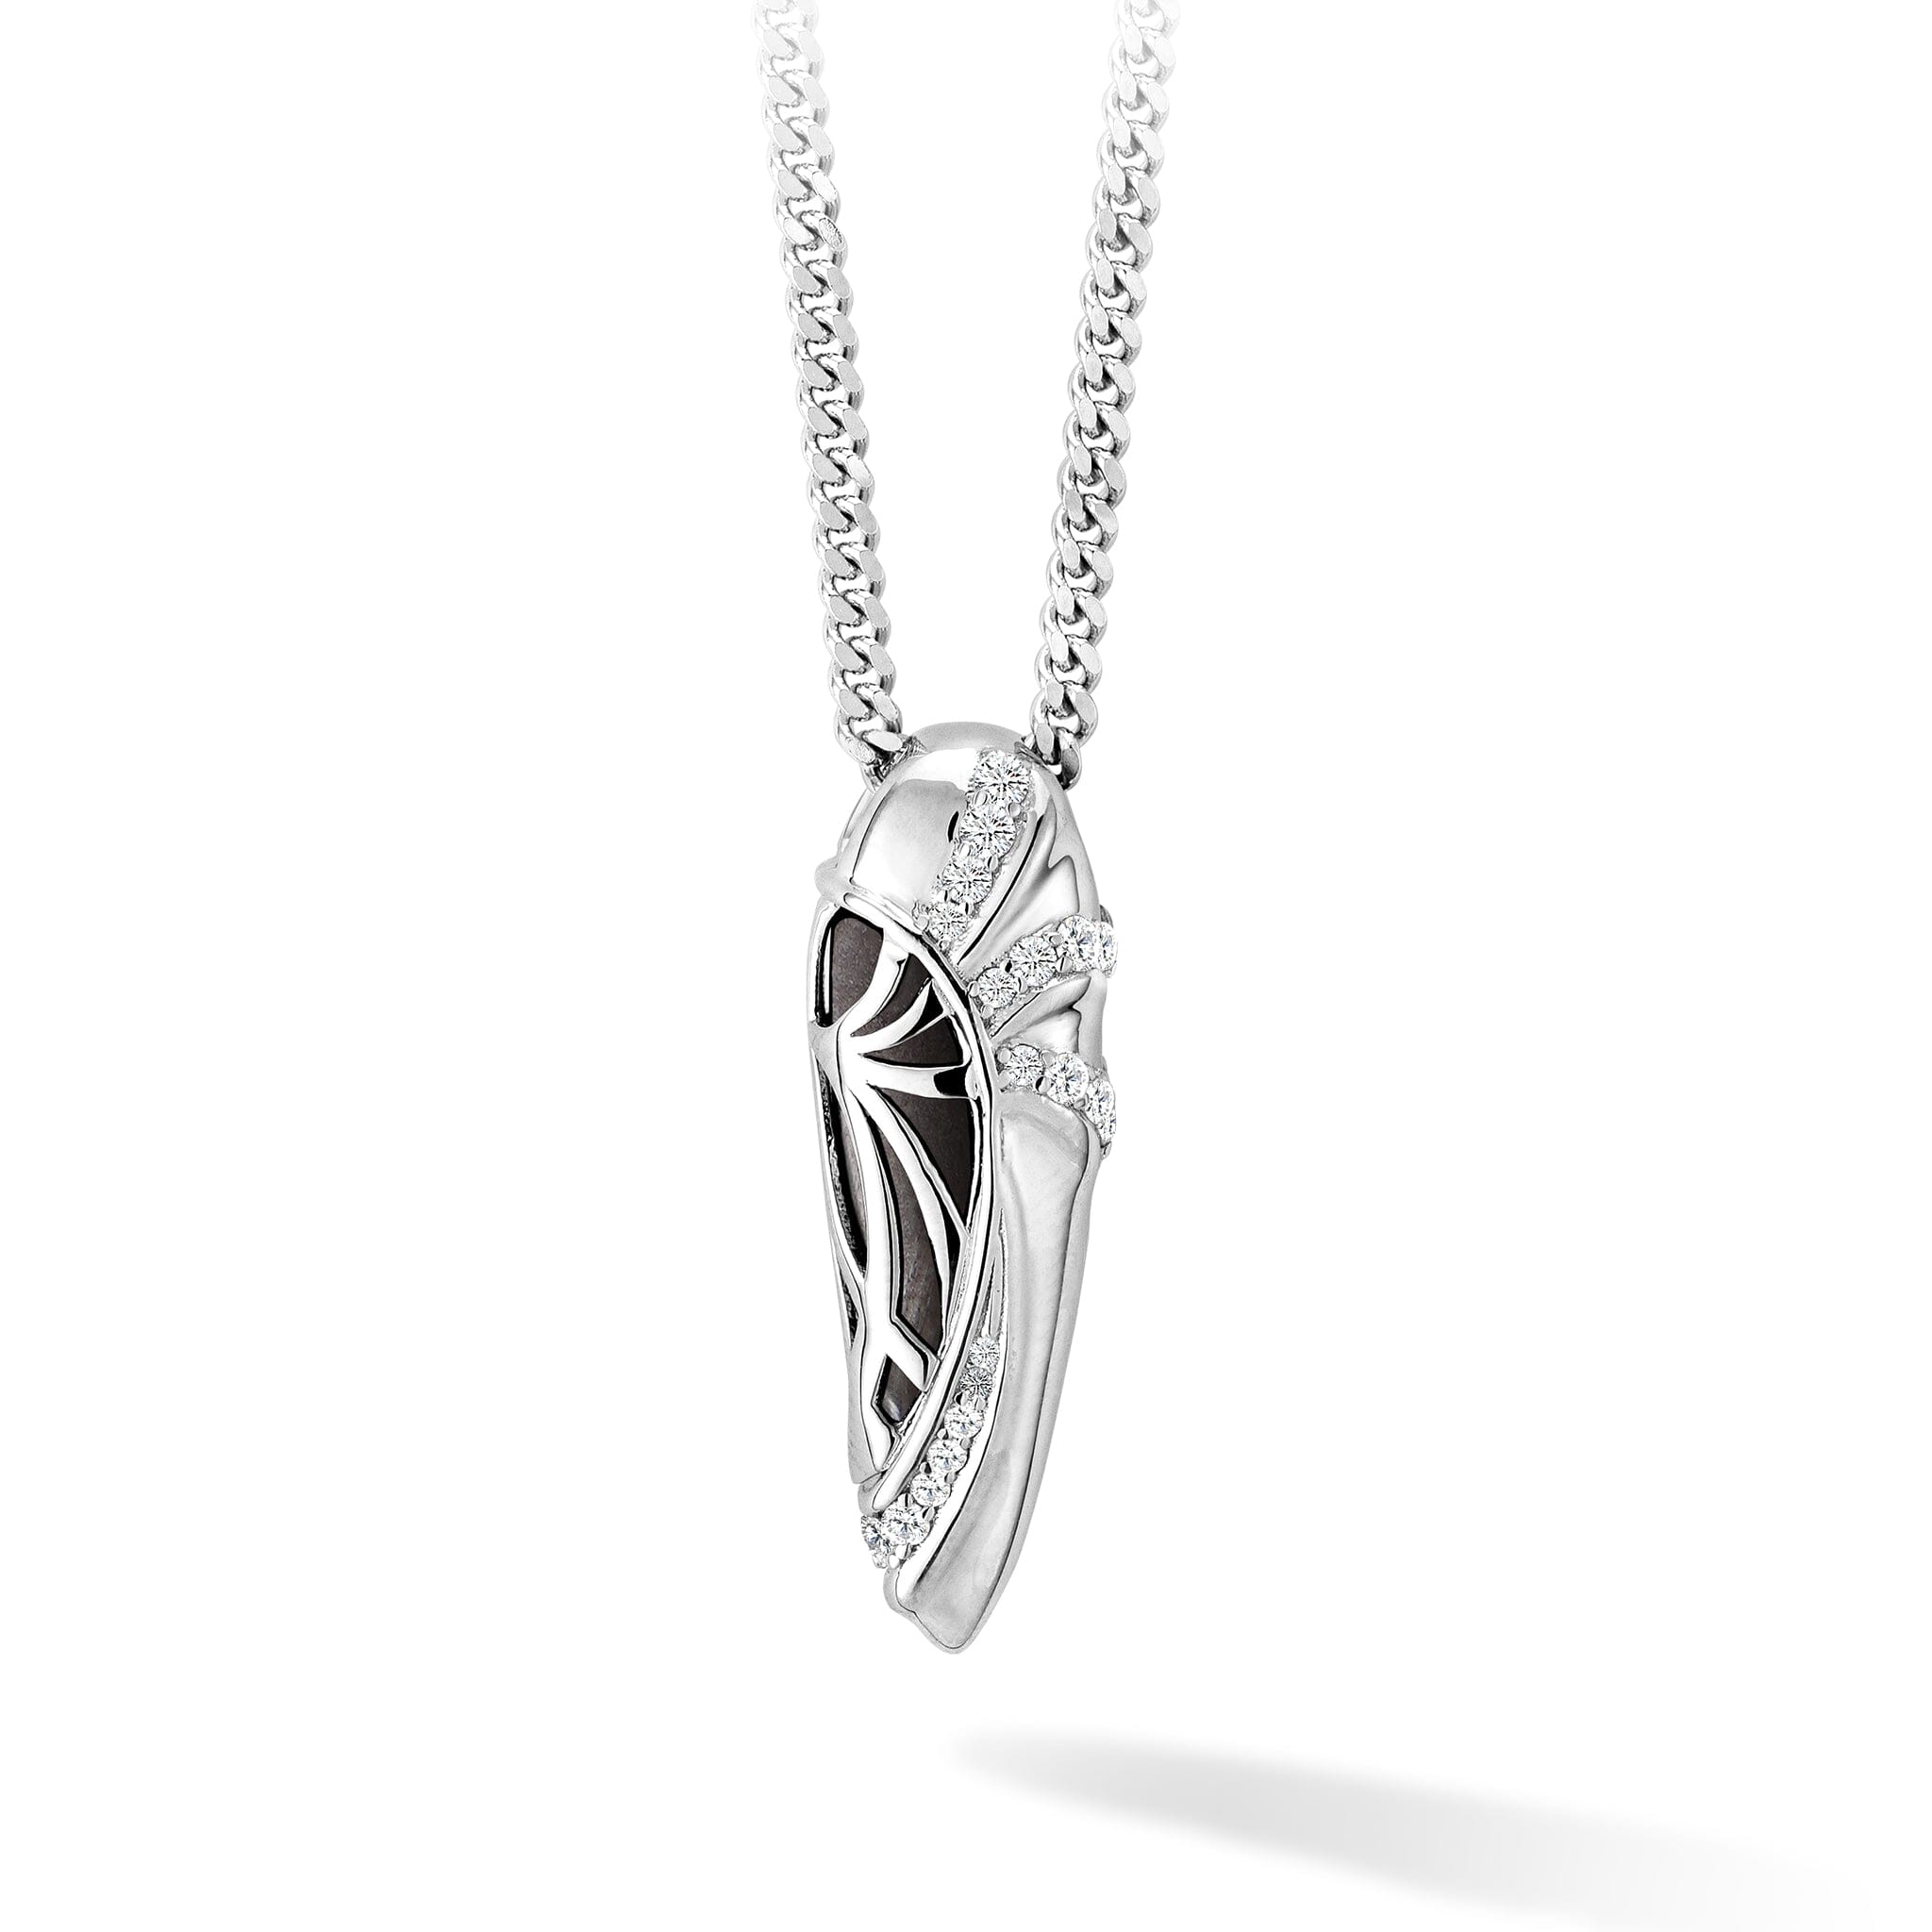 Women's Silver Time Capsule Necklace with Obsidian Necklaces WAA FASHION GROUP 